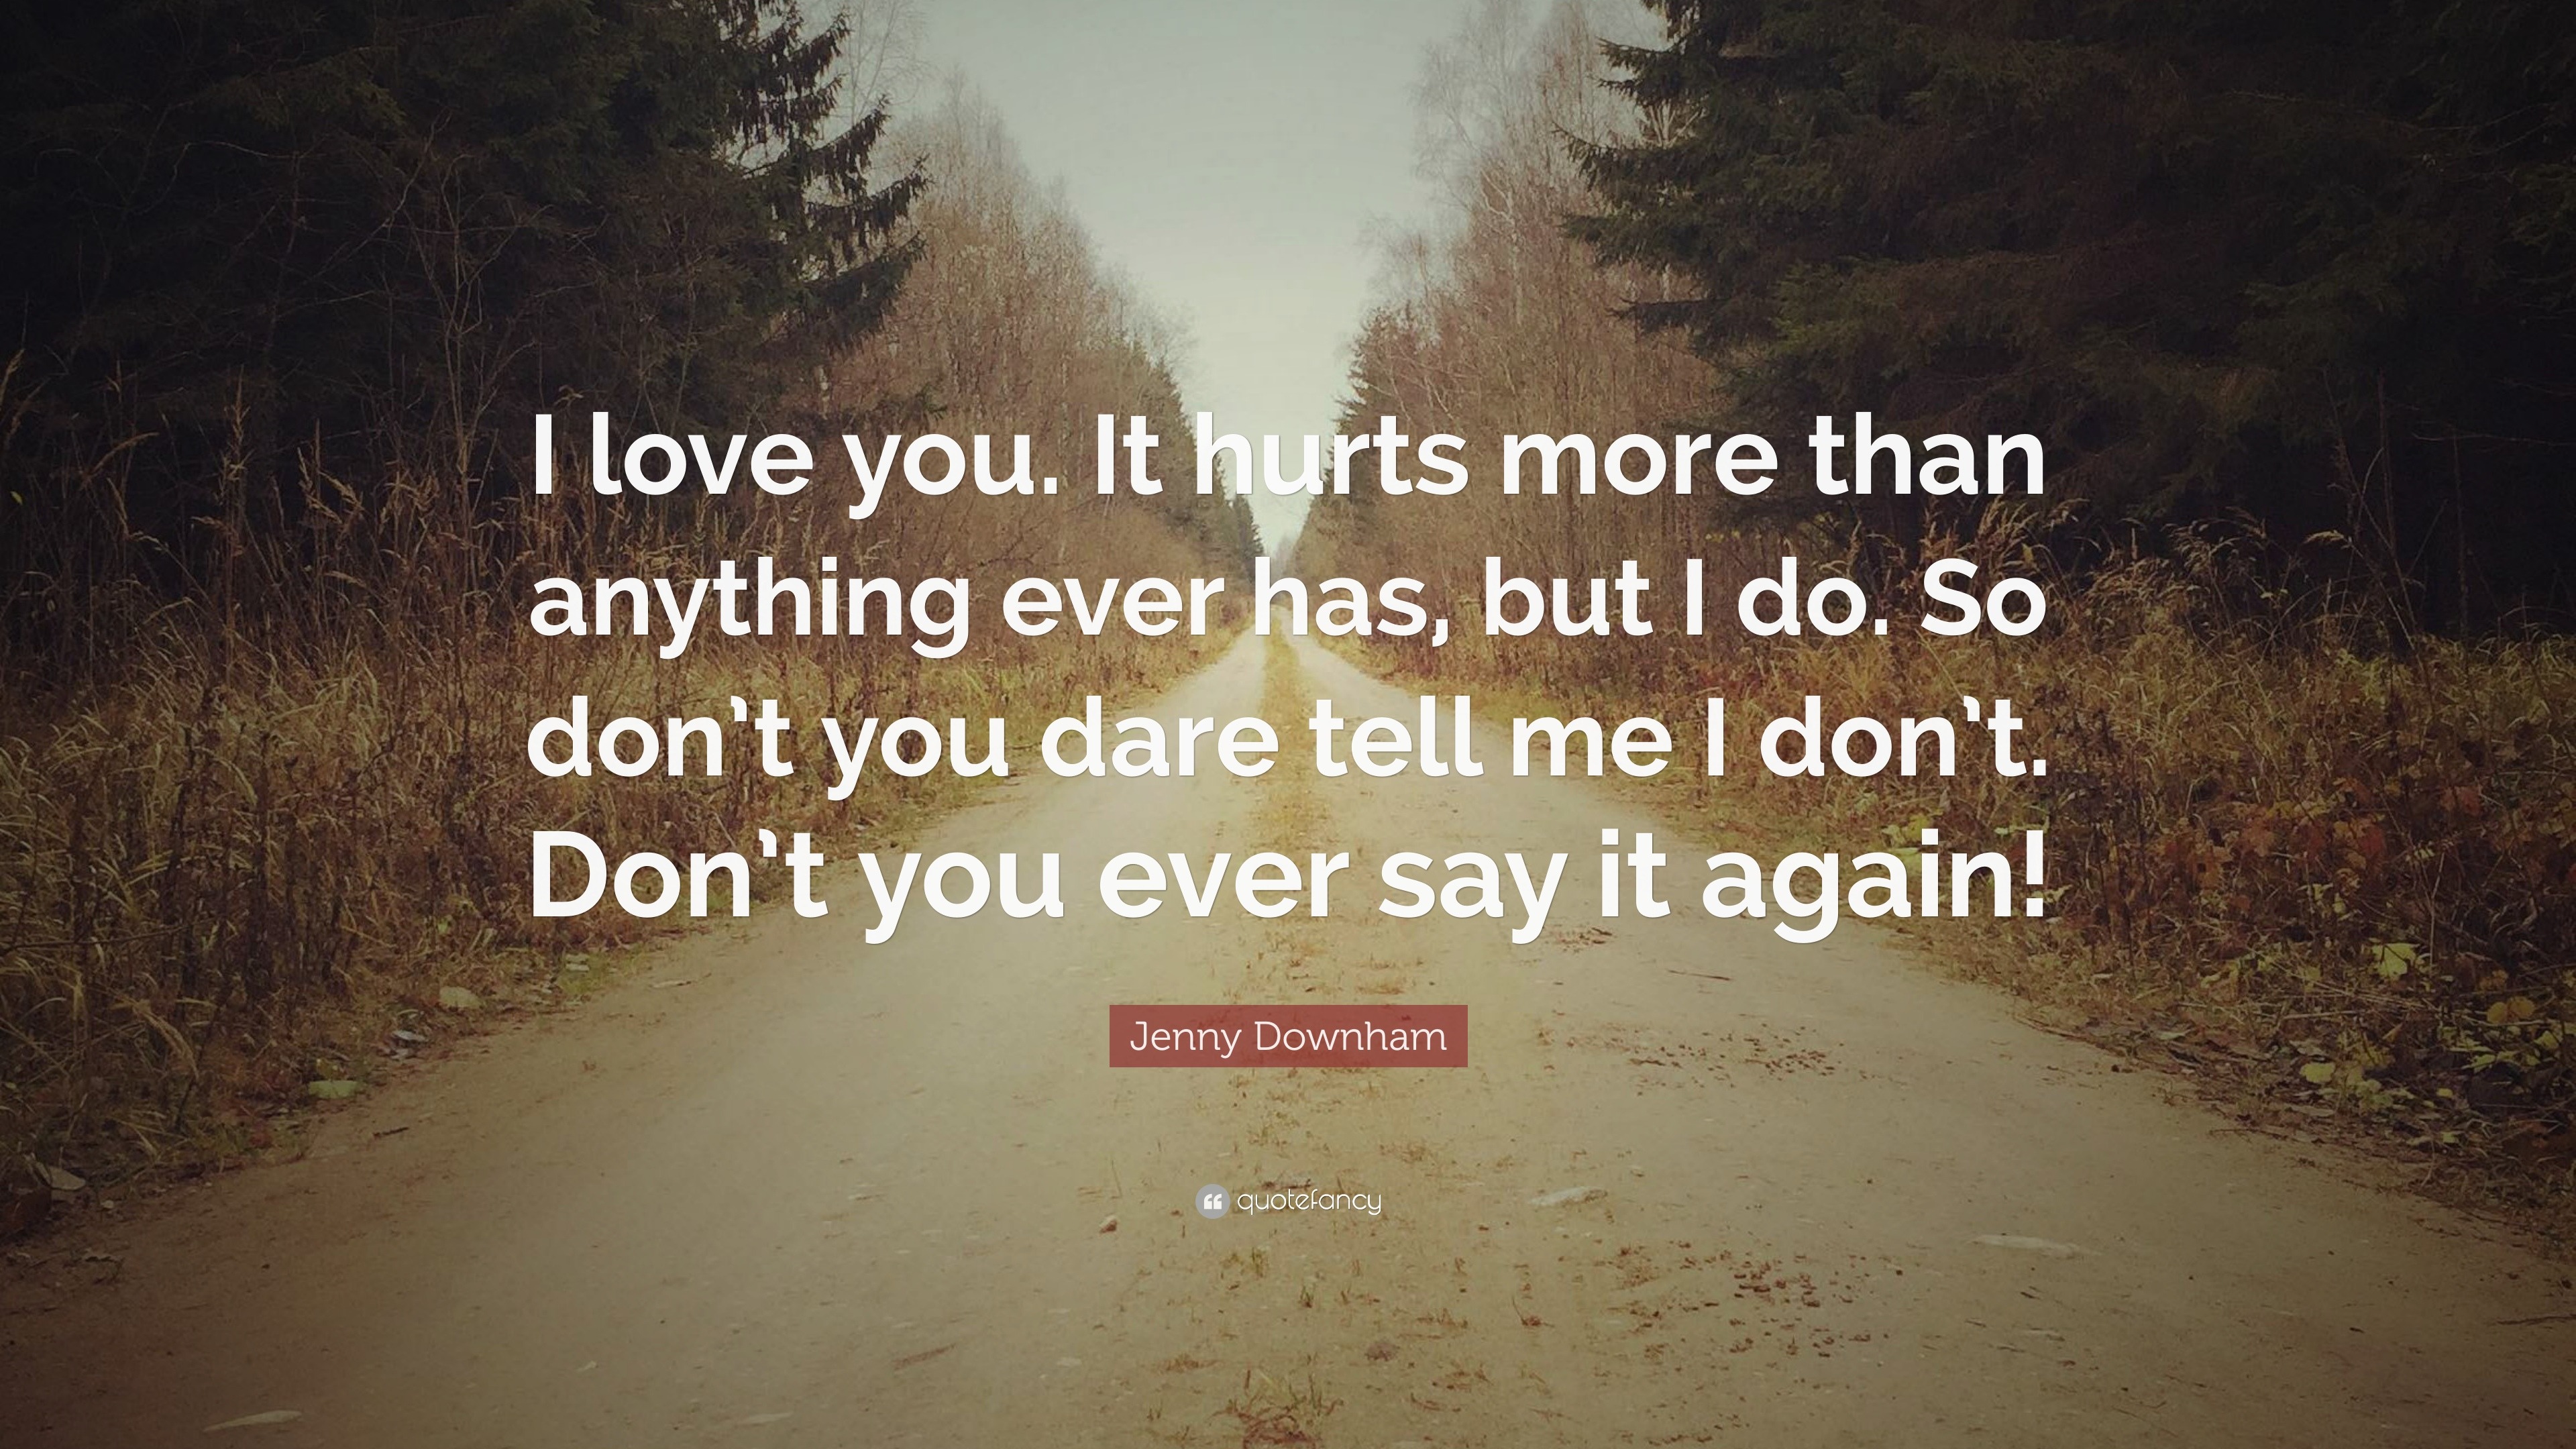 Jenny Downham Quote “I love you It hurts more than anything ever has